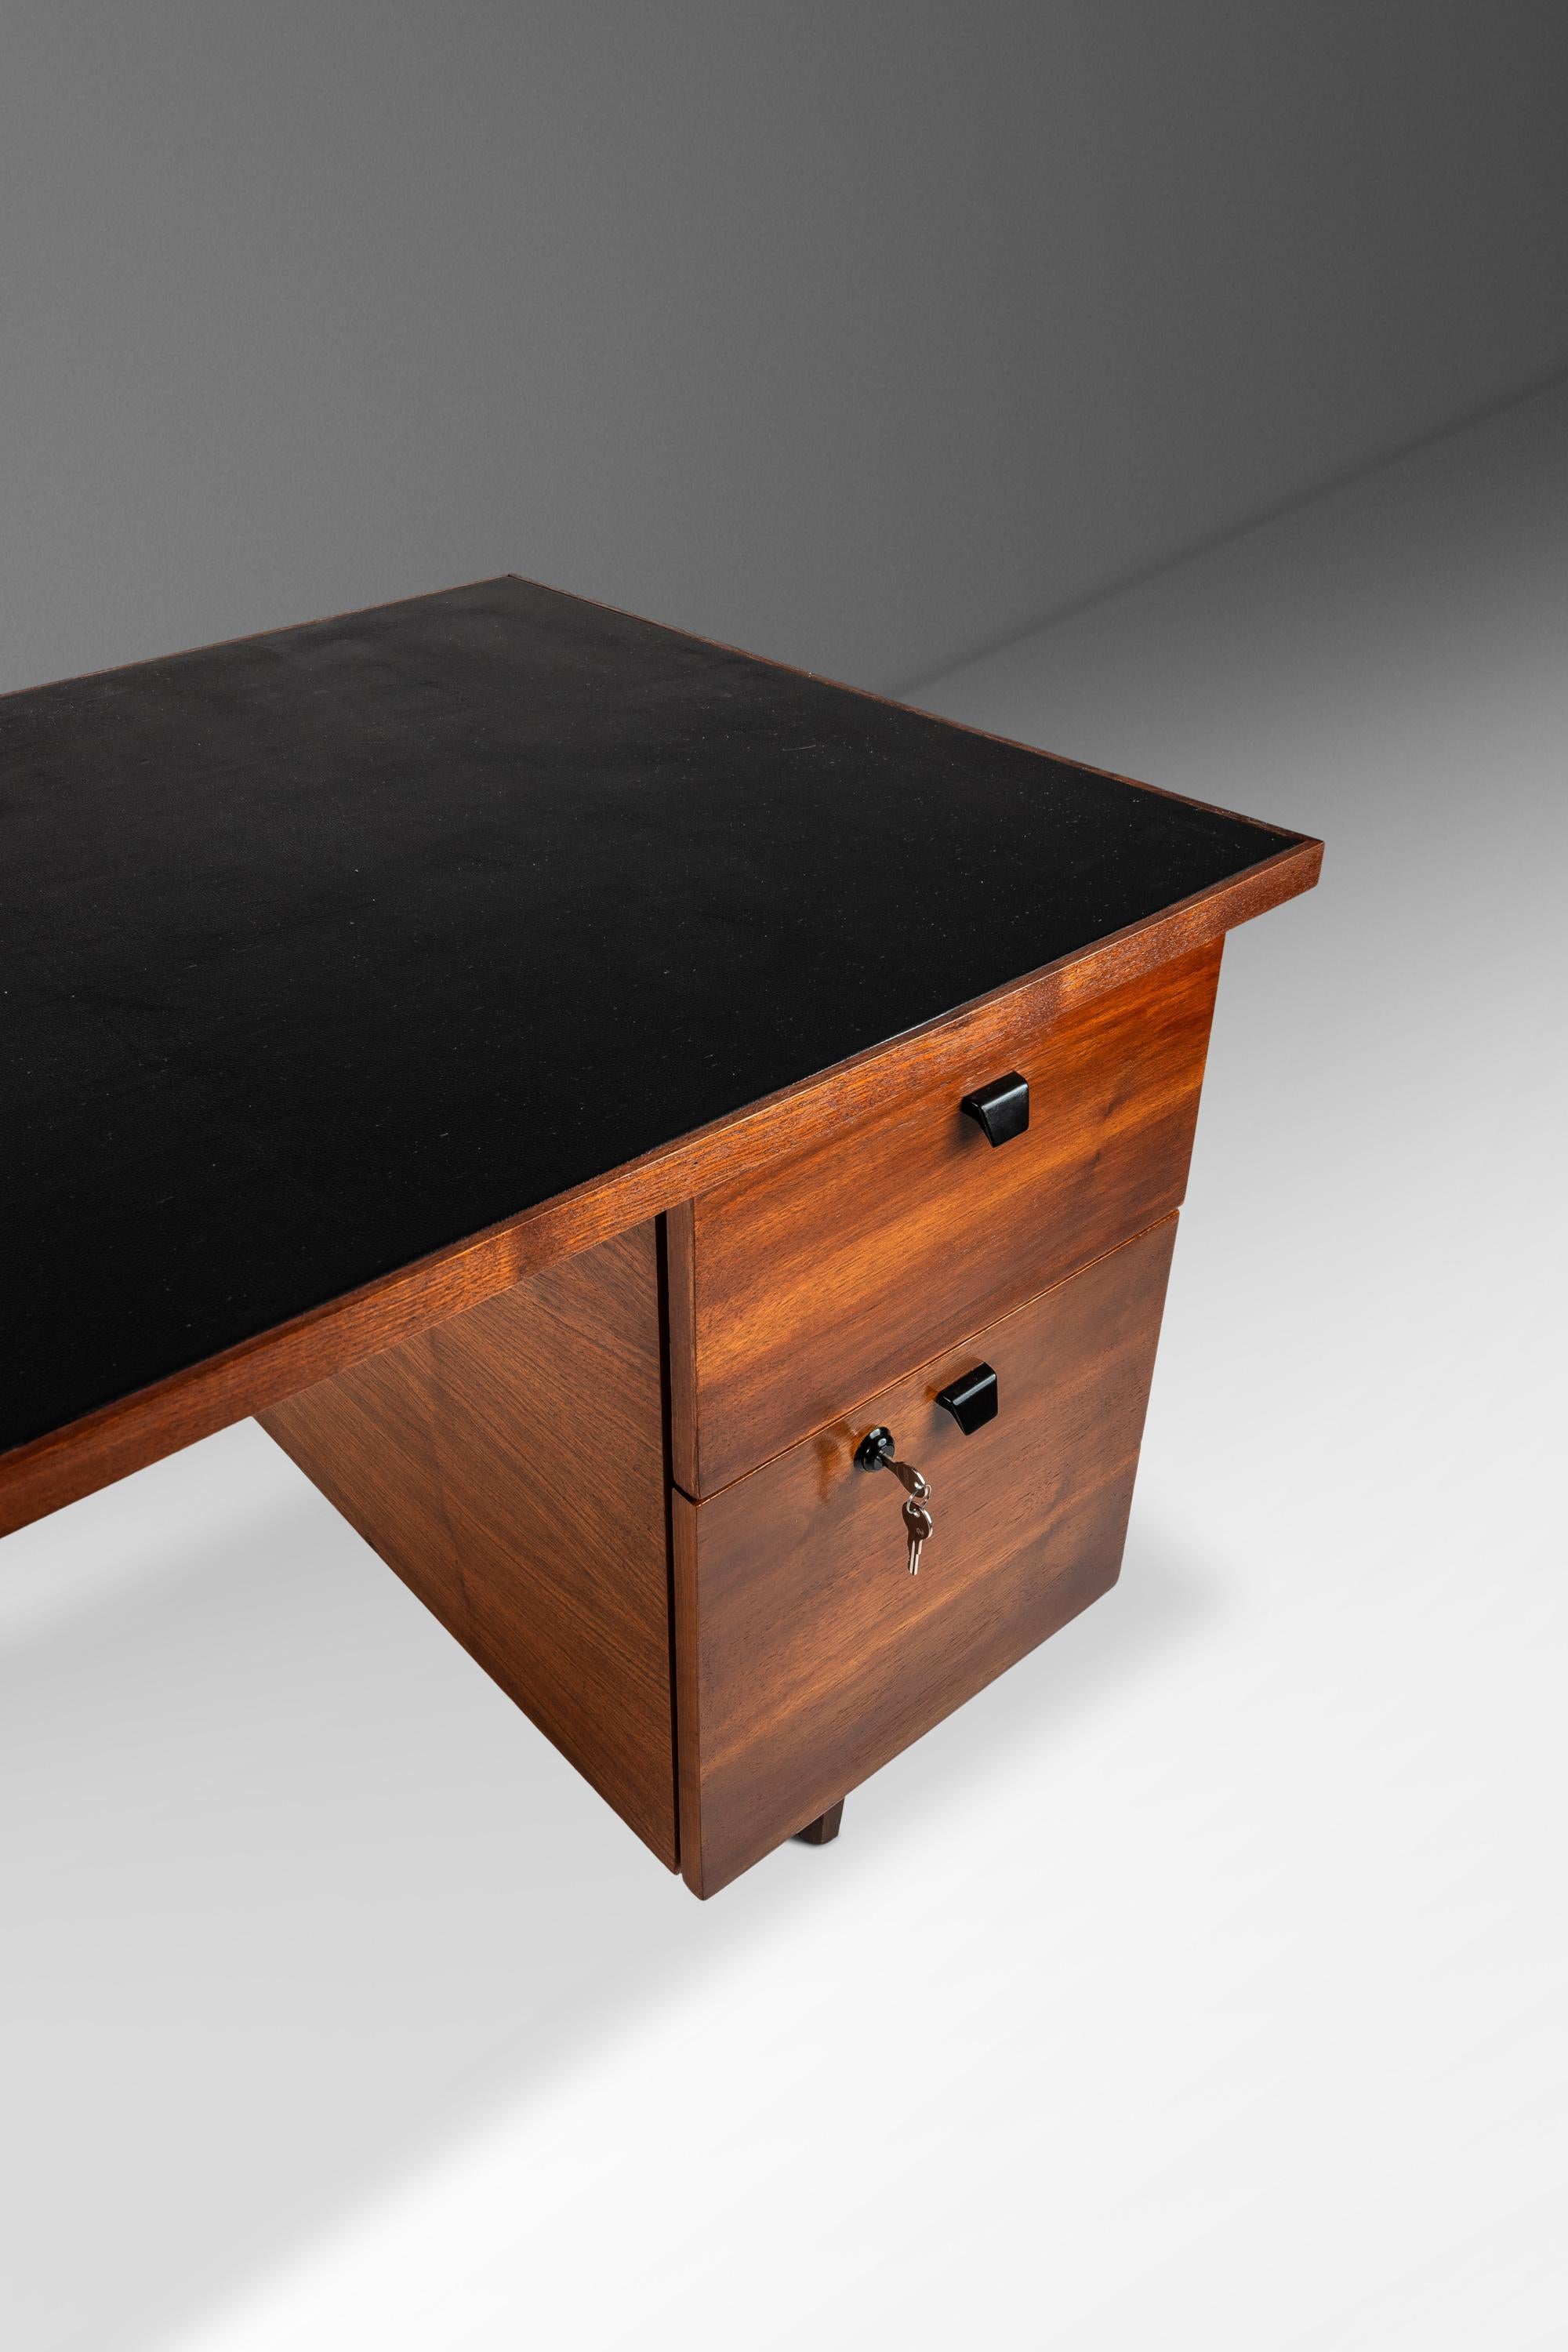 Restored Mid-Century Modern Writers Desk in Walnut with Leather Top, USA, 1960's For Sale 2